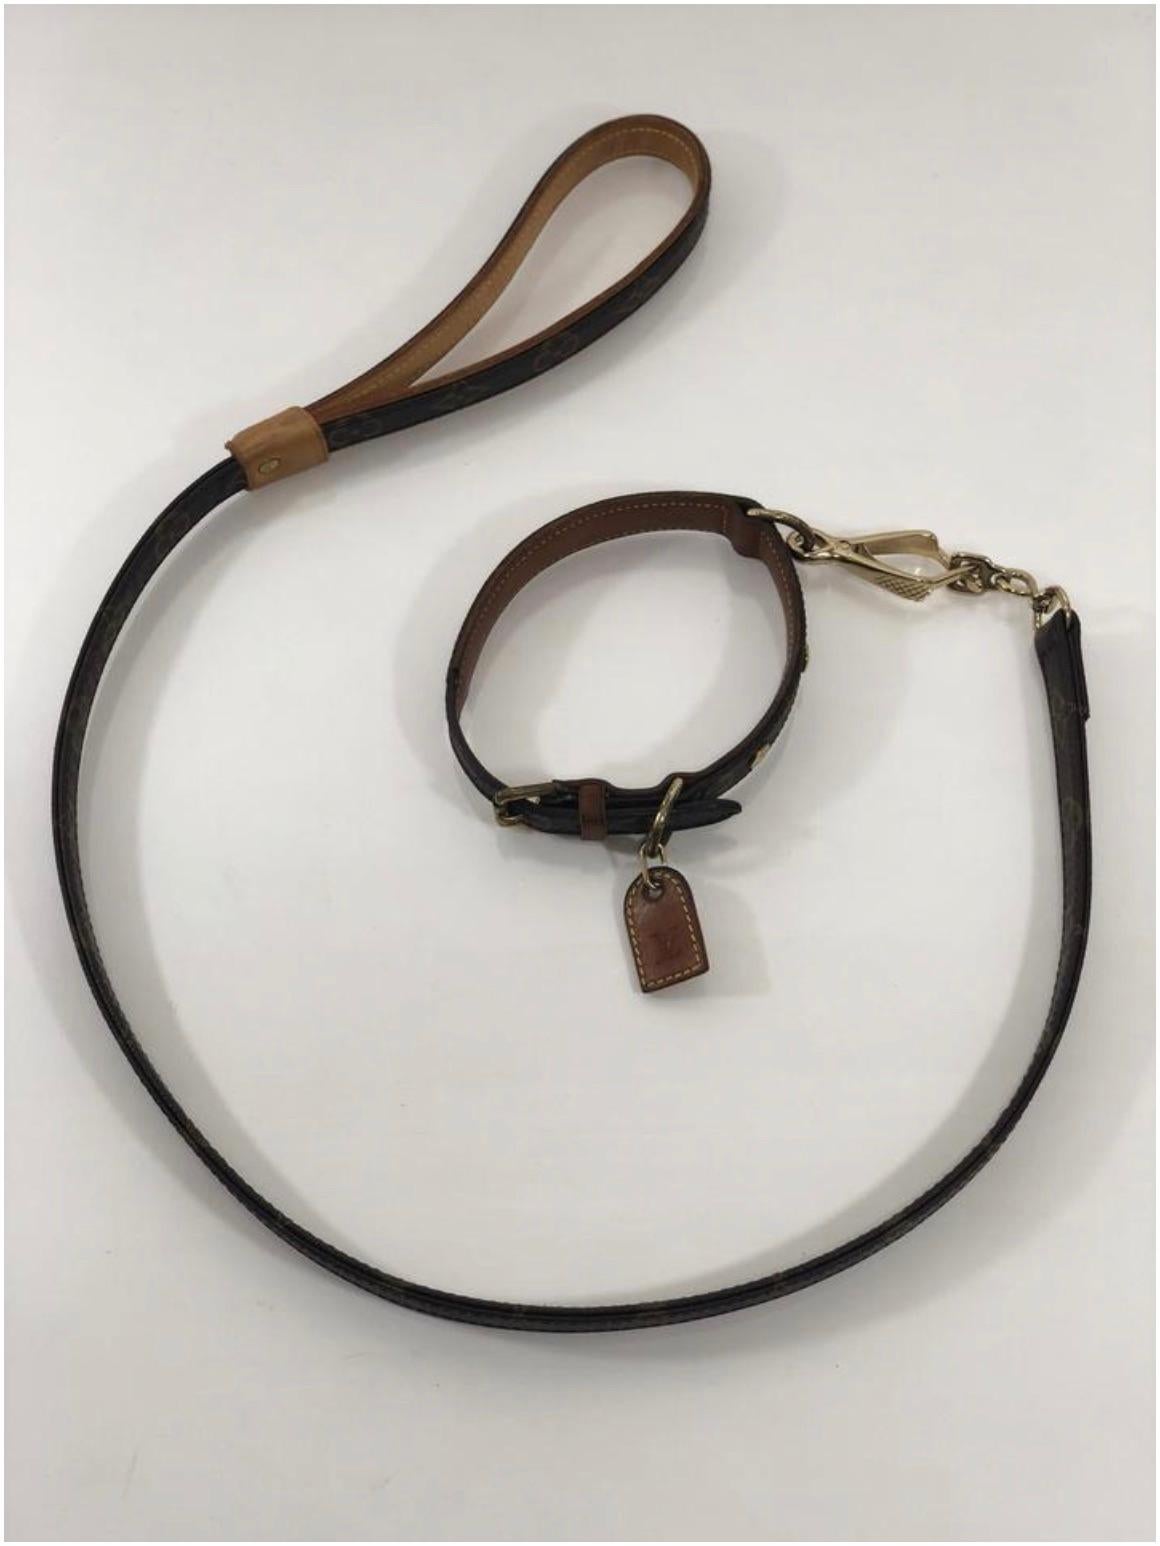 MODEL - Louis Vuitton Monogram Leash Baxter GM and Collier Baxter GM

CONDITION - Exceptional!  Medium vachette, no watermarks, no handle darkening with collar darkening on inside.  No dryness and light scuffing.  Bright and shiny hardware with